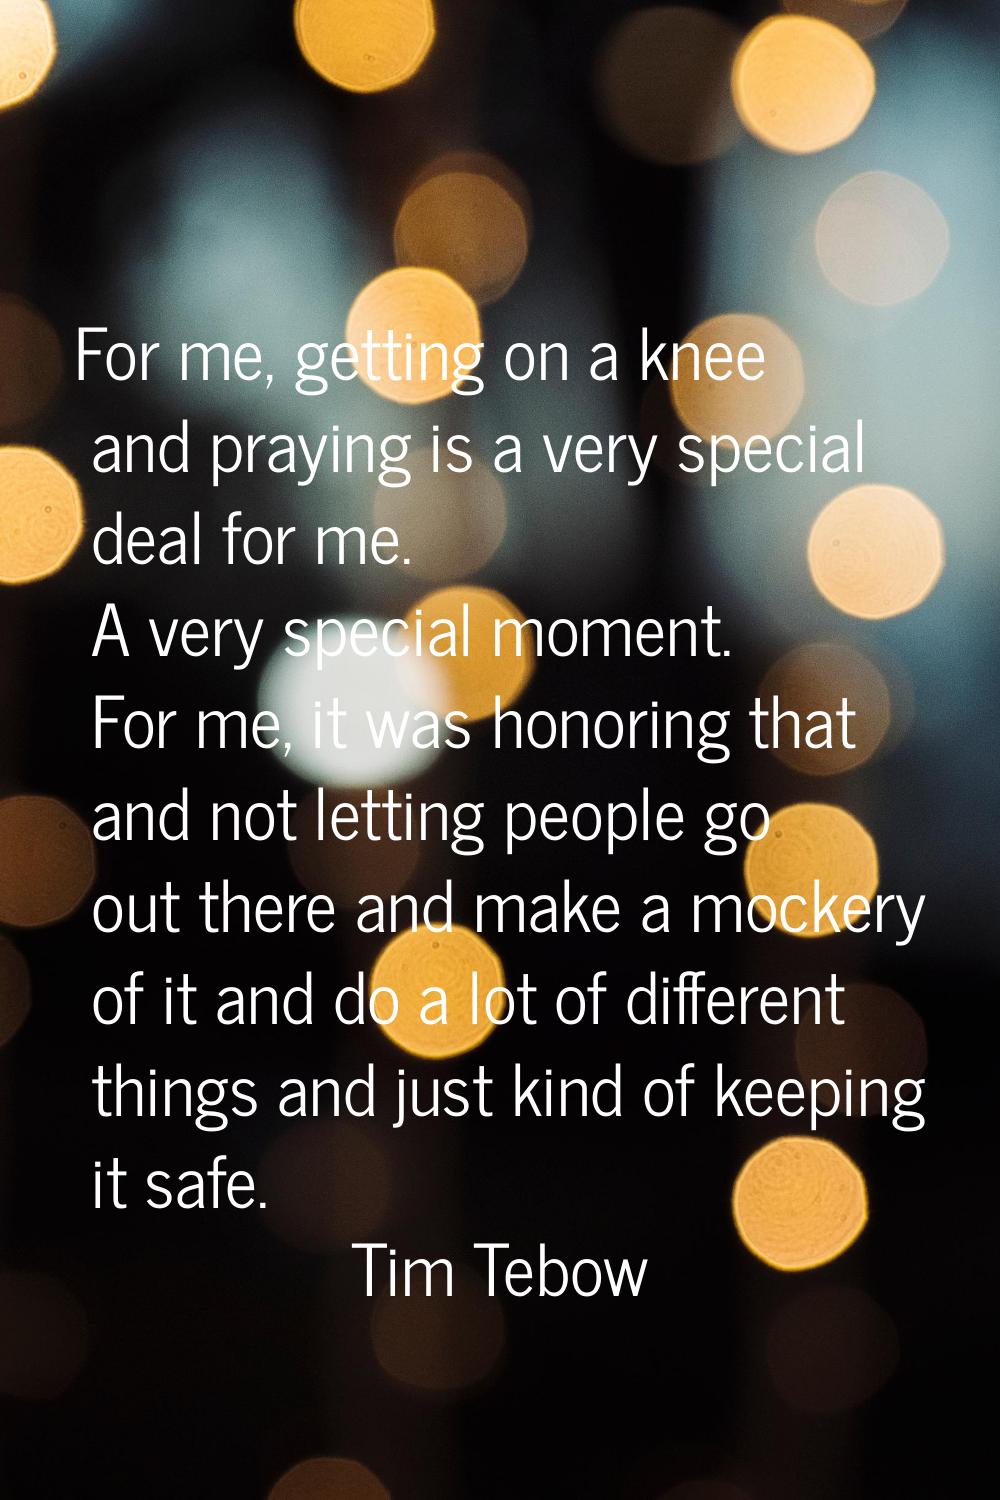 For me, getting on a knee and praying is a very special deal for me. A very special moment. For me,